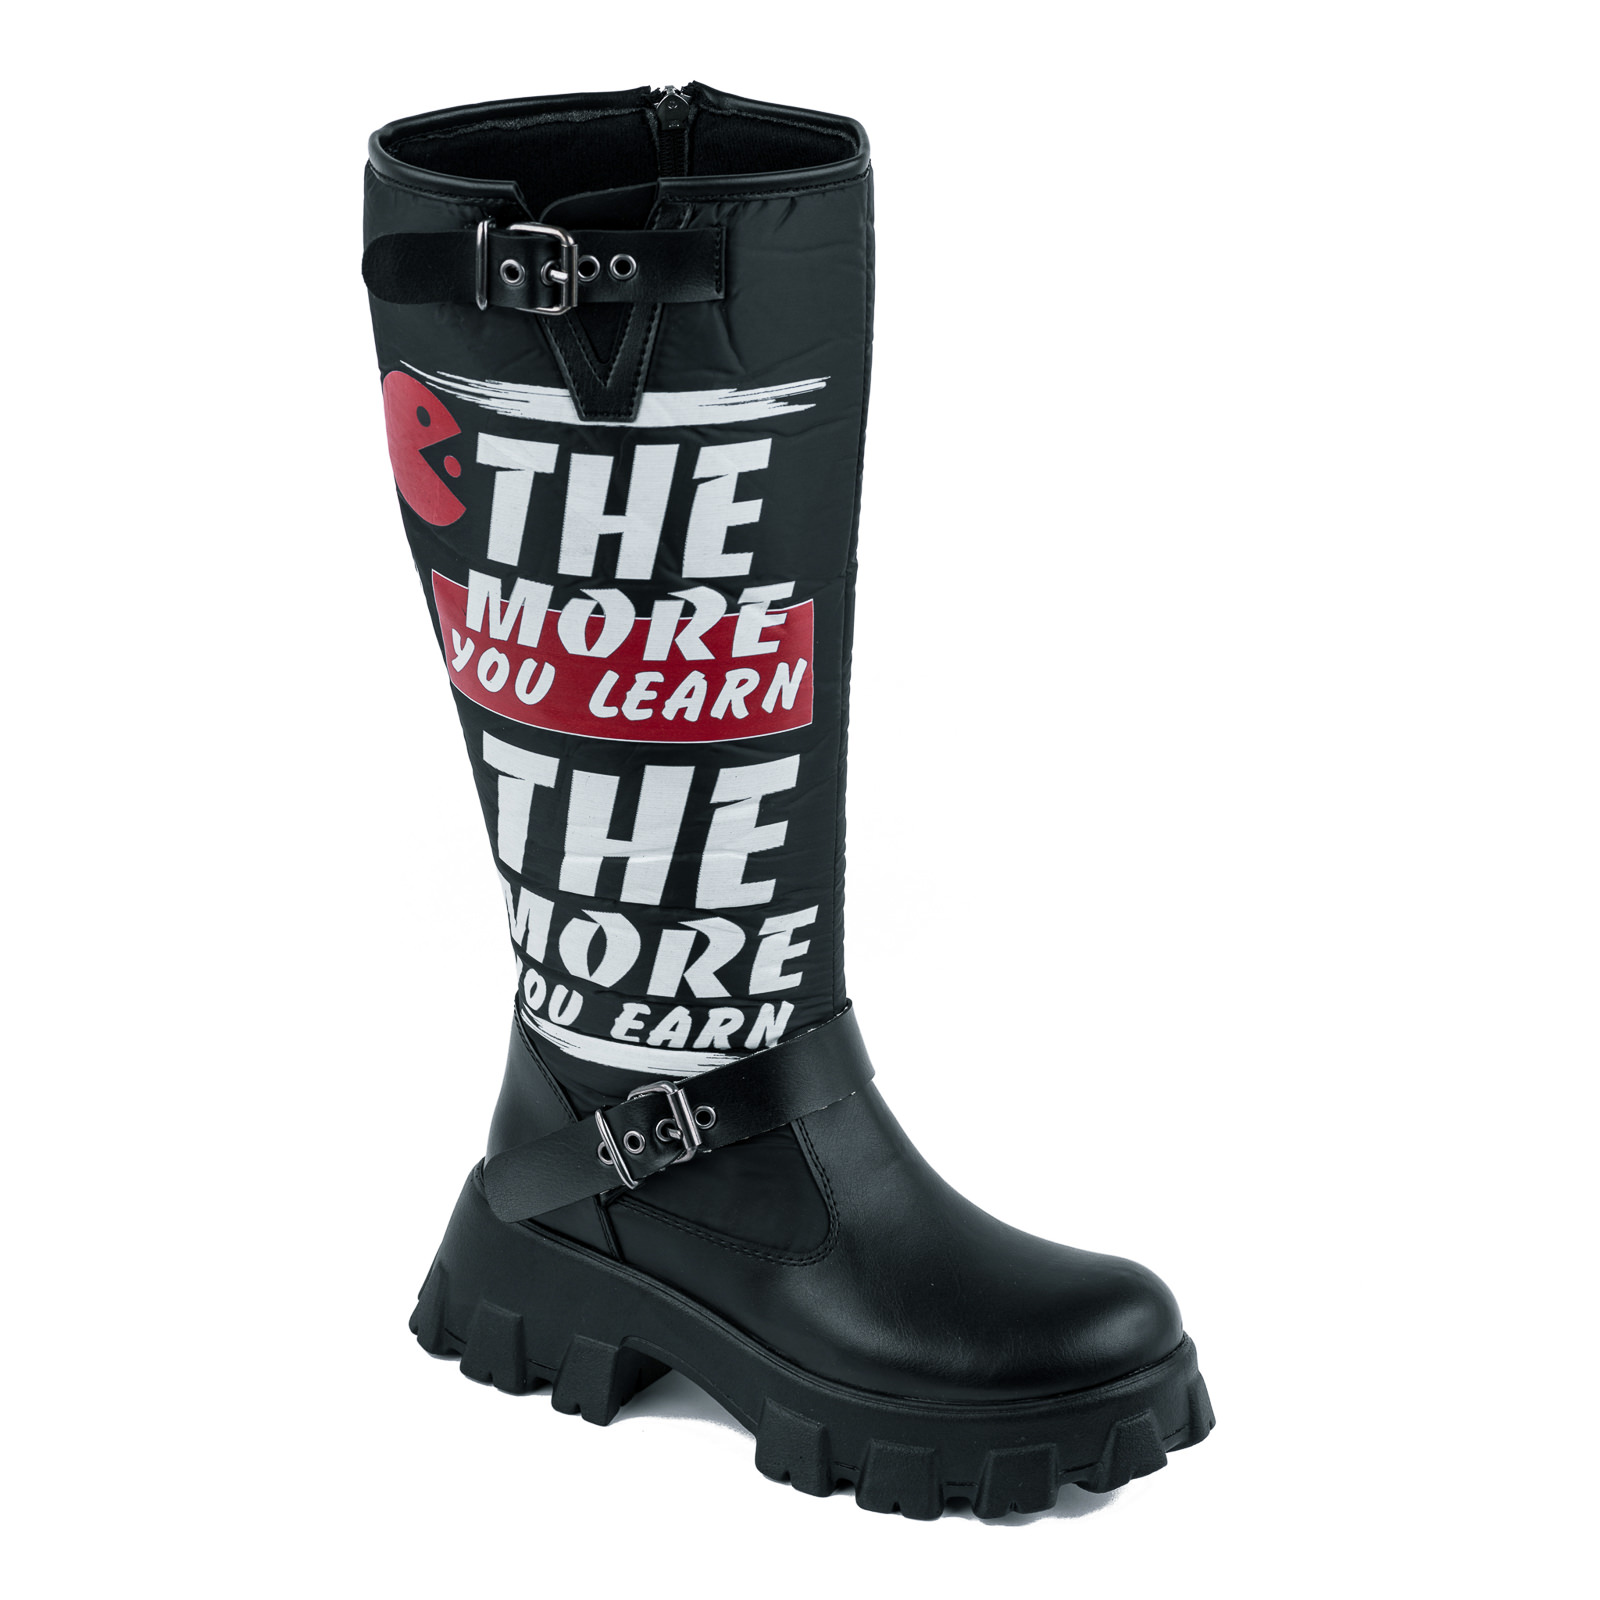 WATERPROOF BOOTS WITH INSCRIPTIONS - BLACK